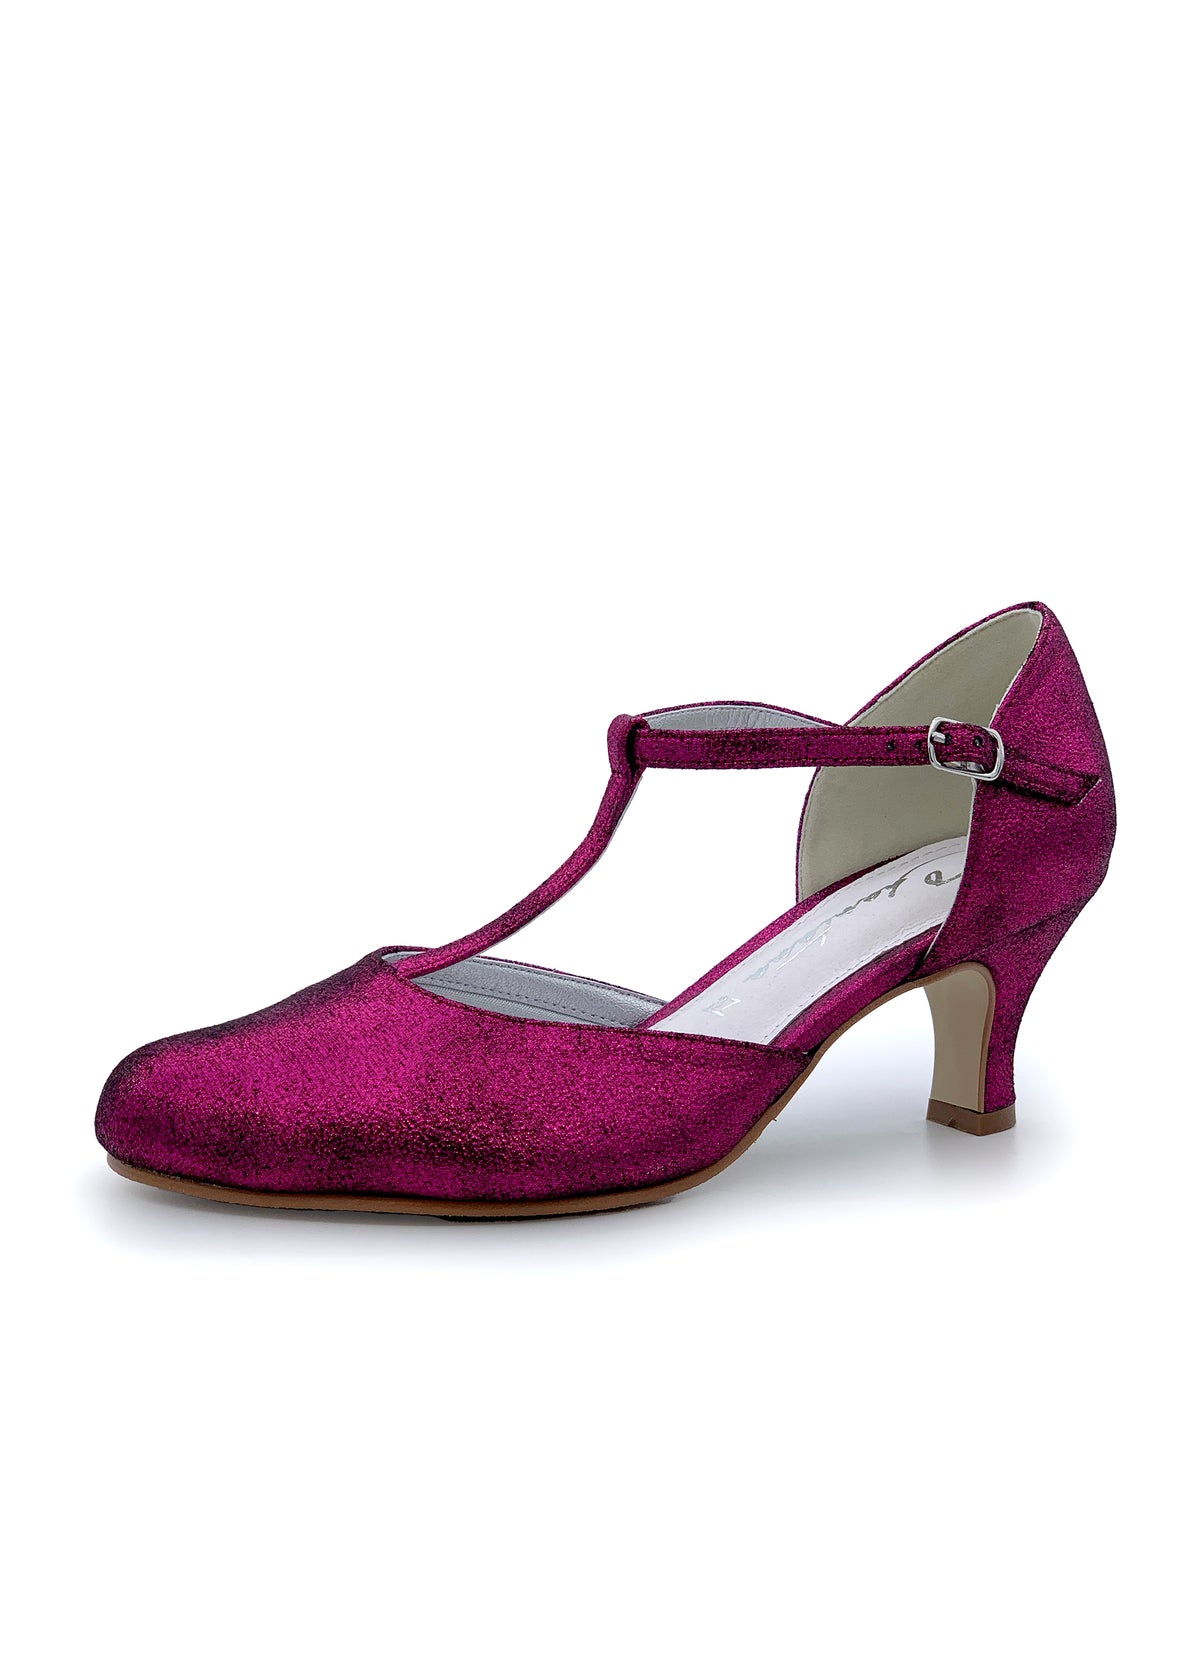 Open-toed shoes with ankle straps - sparkling pink